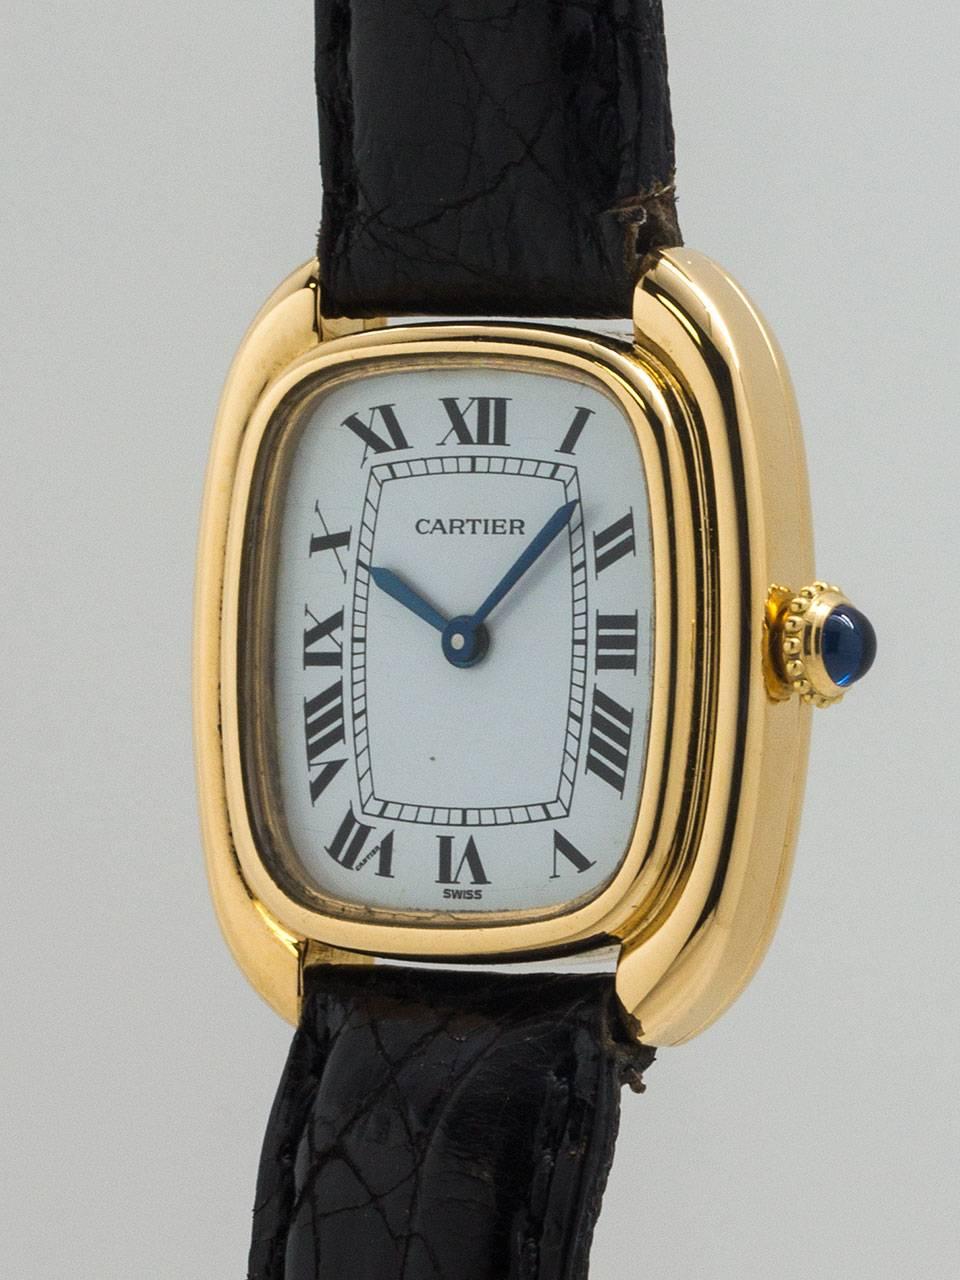 Cartier 18K YG lady Gondole model circa 1970’s. Scarce and great looking elongated cushion shaped case with stepped and grooved sides. With mineral glass crystal and original glossy white classic Cartier dial with Roman figures and blued steel